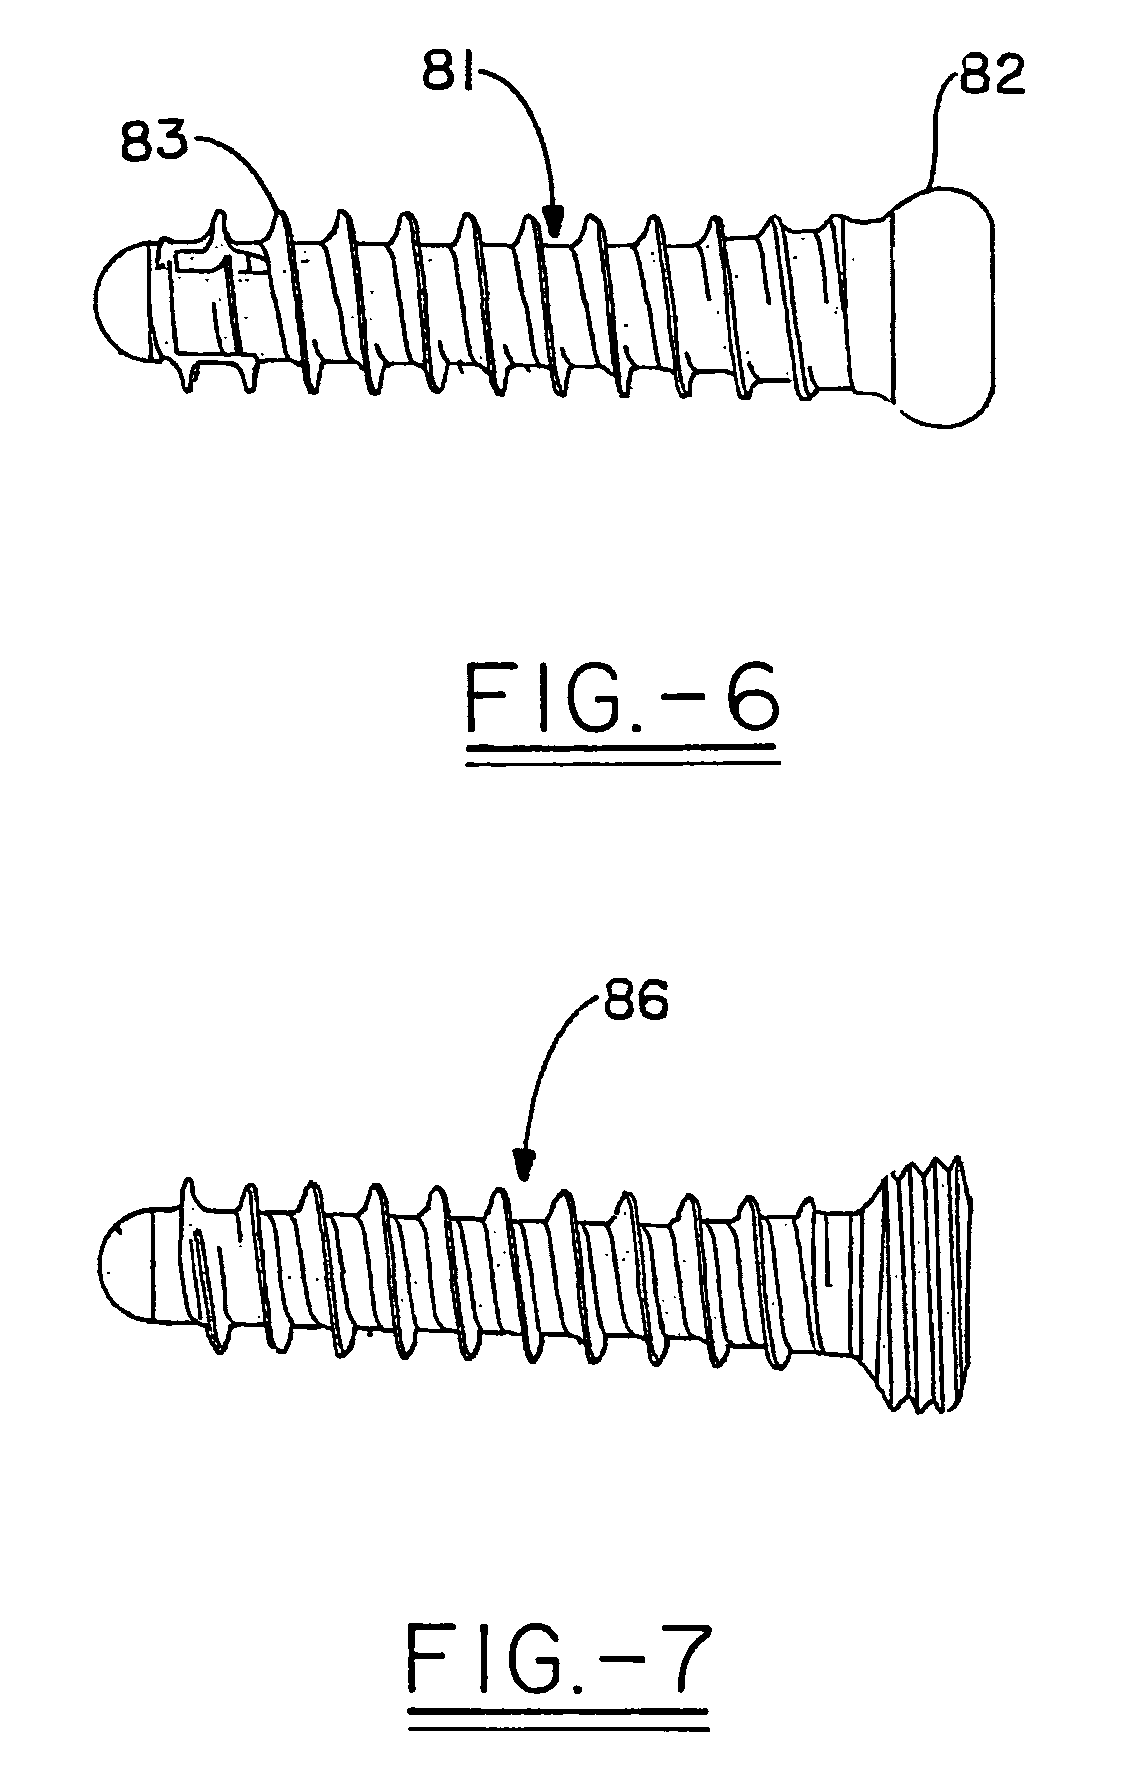 Orthopedic plates for use in clavicle repair and methods for their use